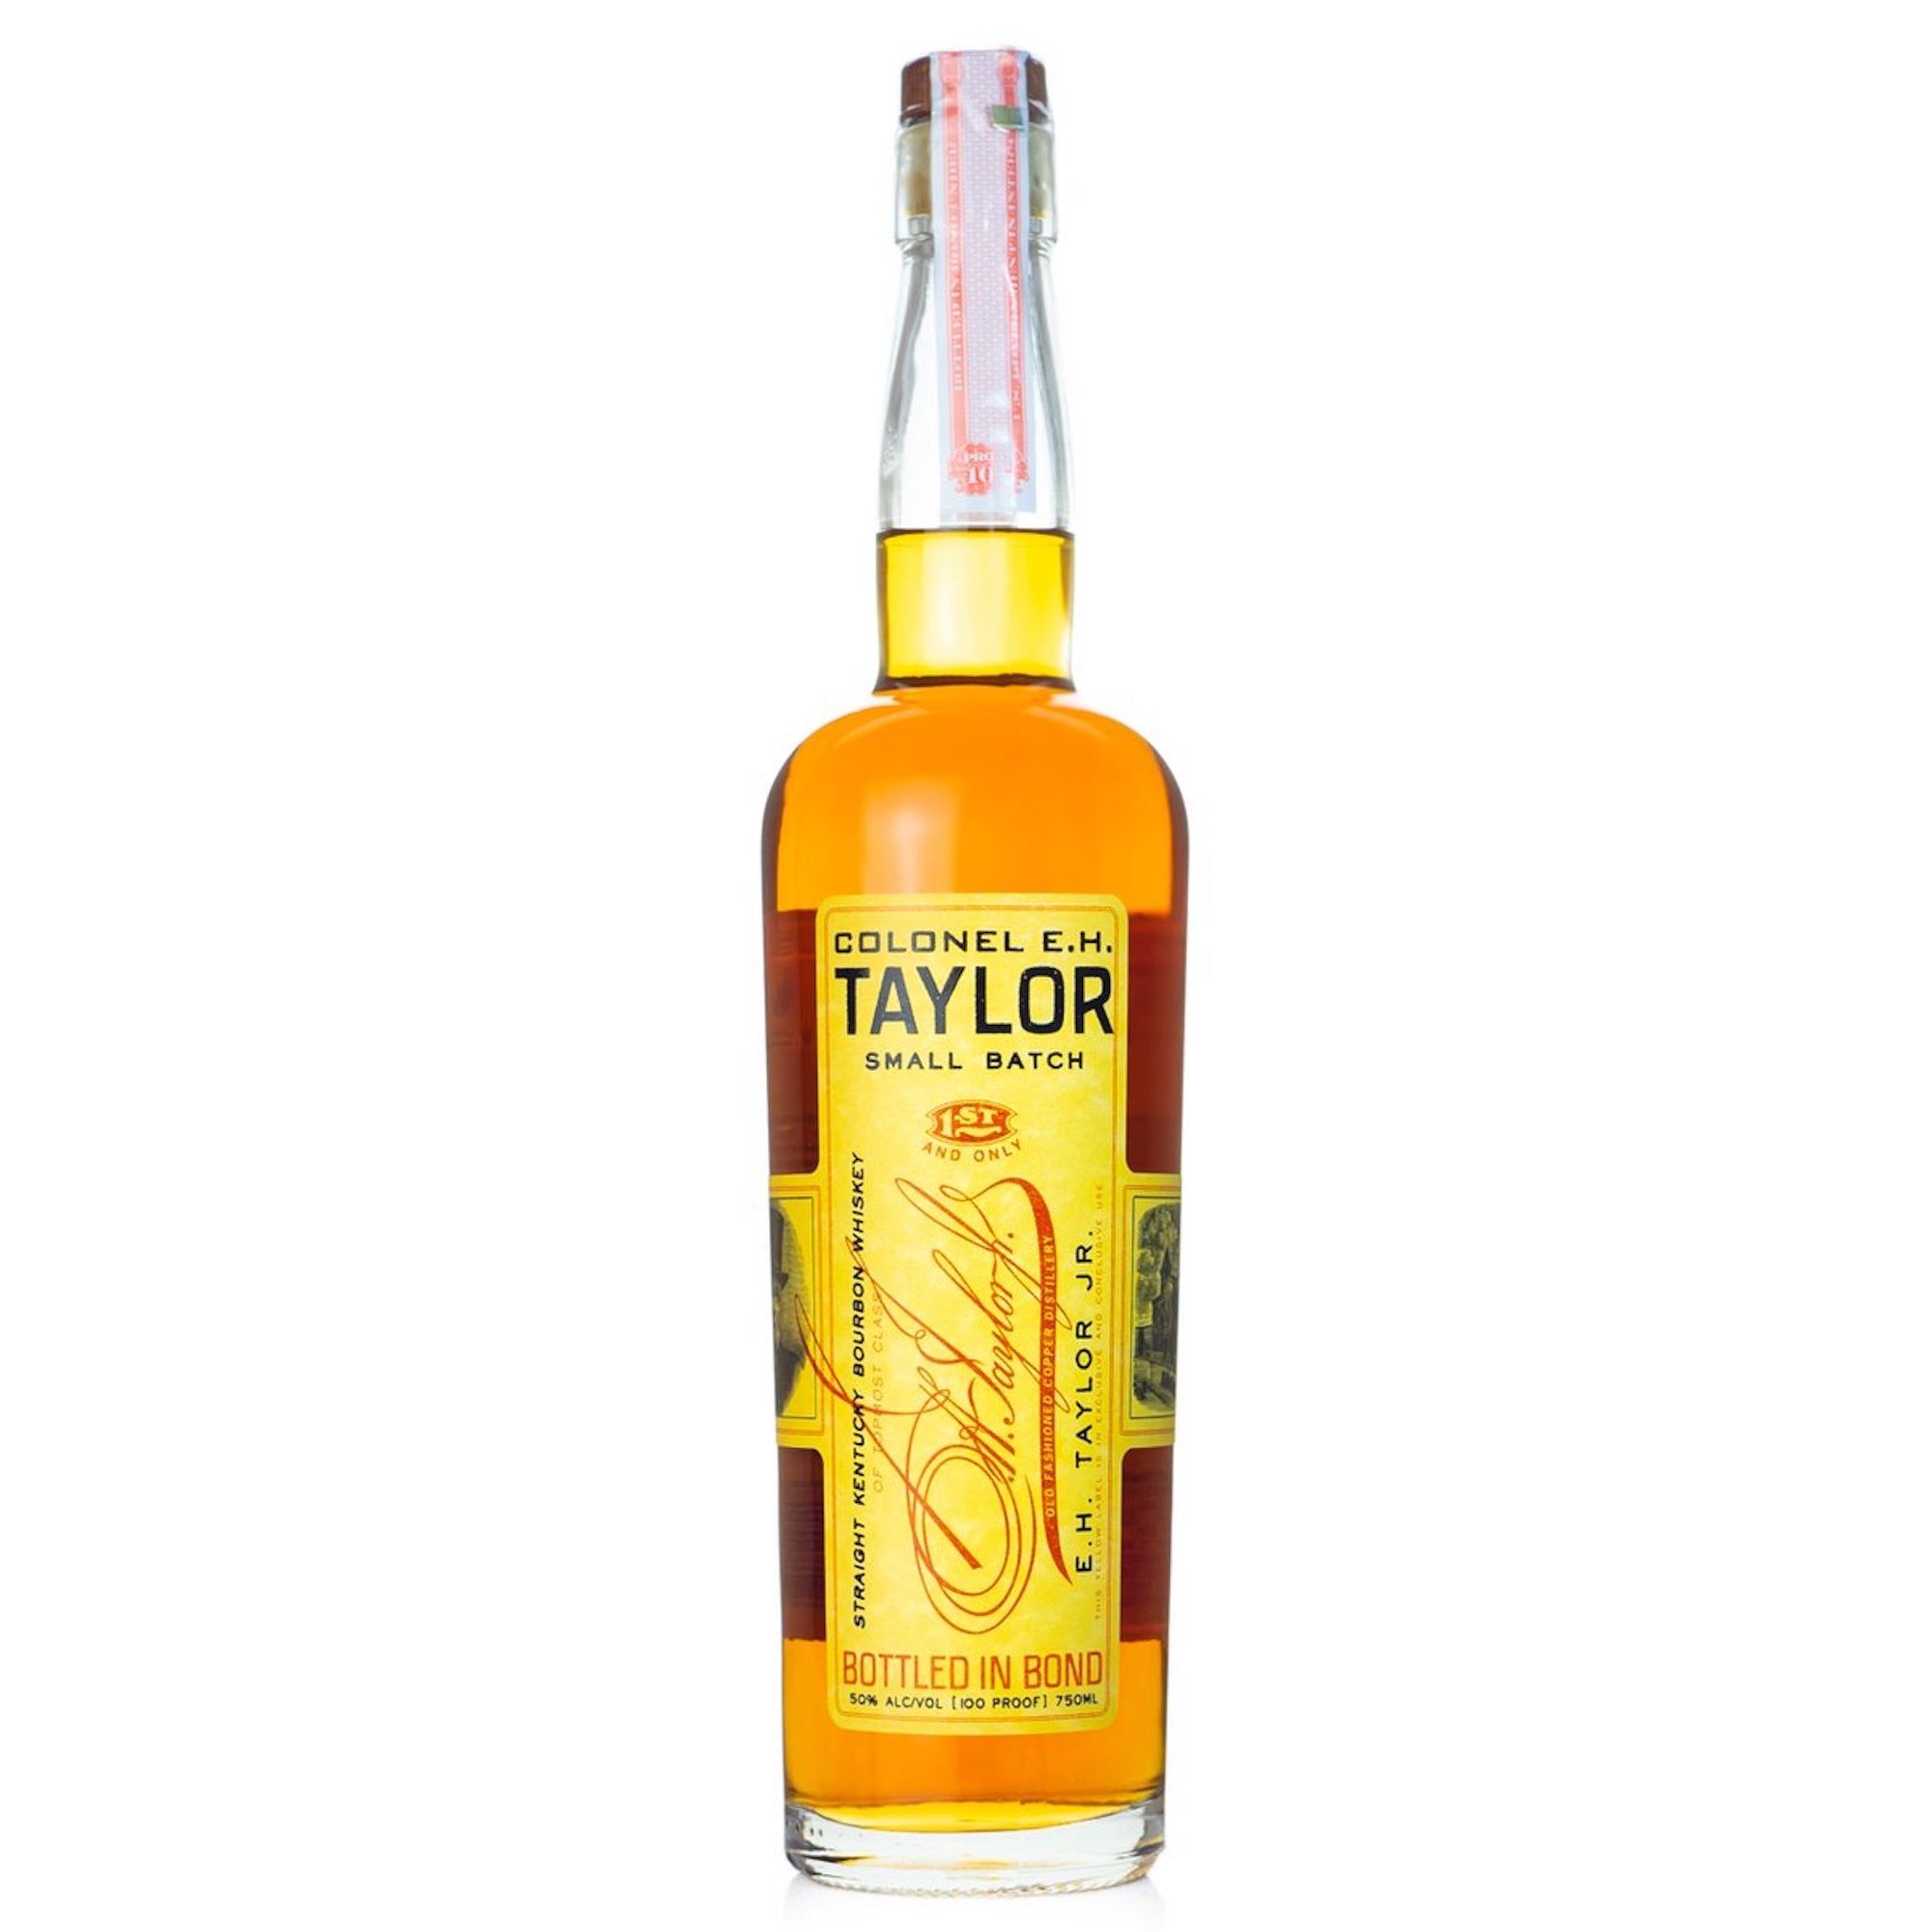 Colonel E.H. Taylor Small Batch Bottled In Bond Bourbon Whiskey